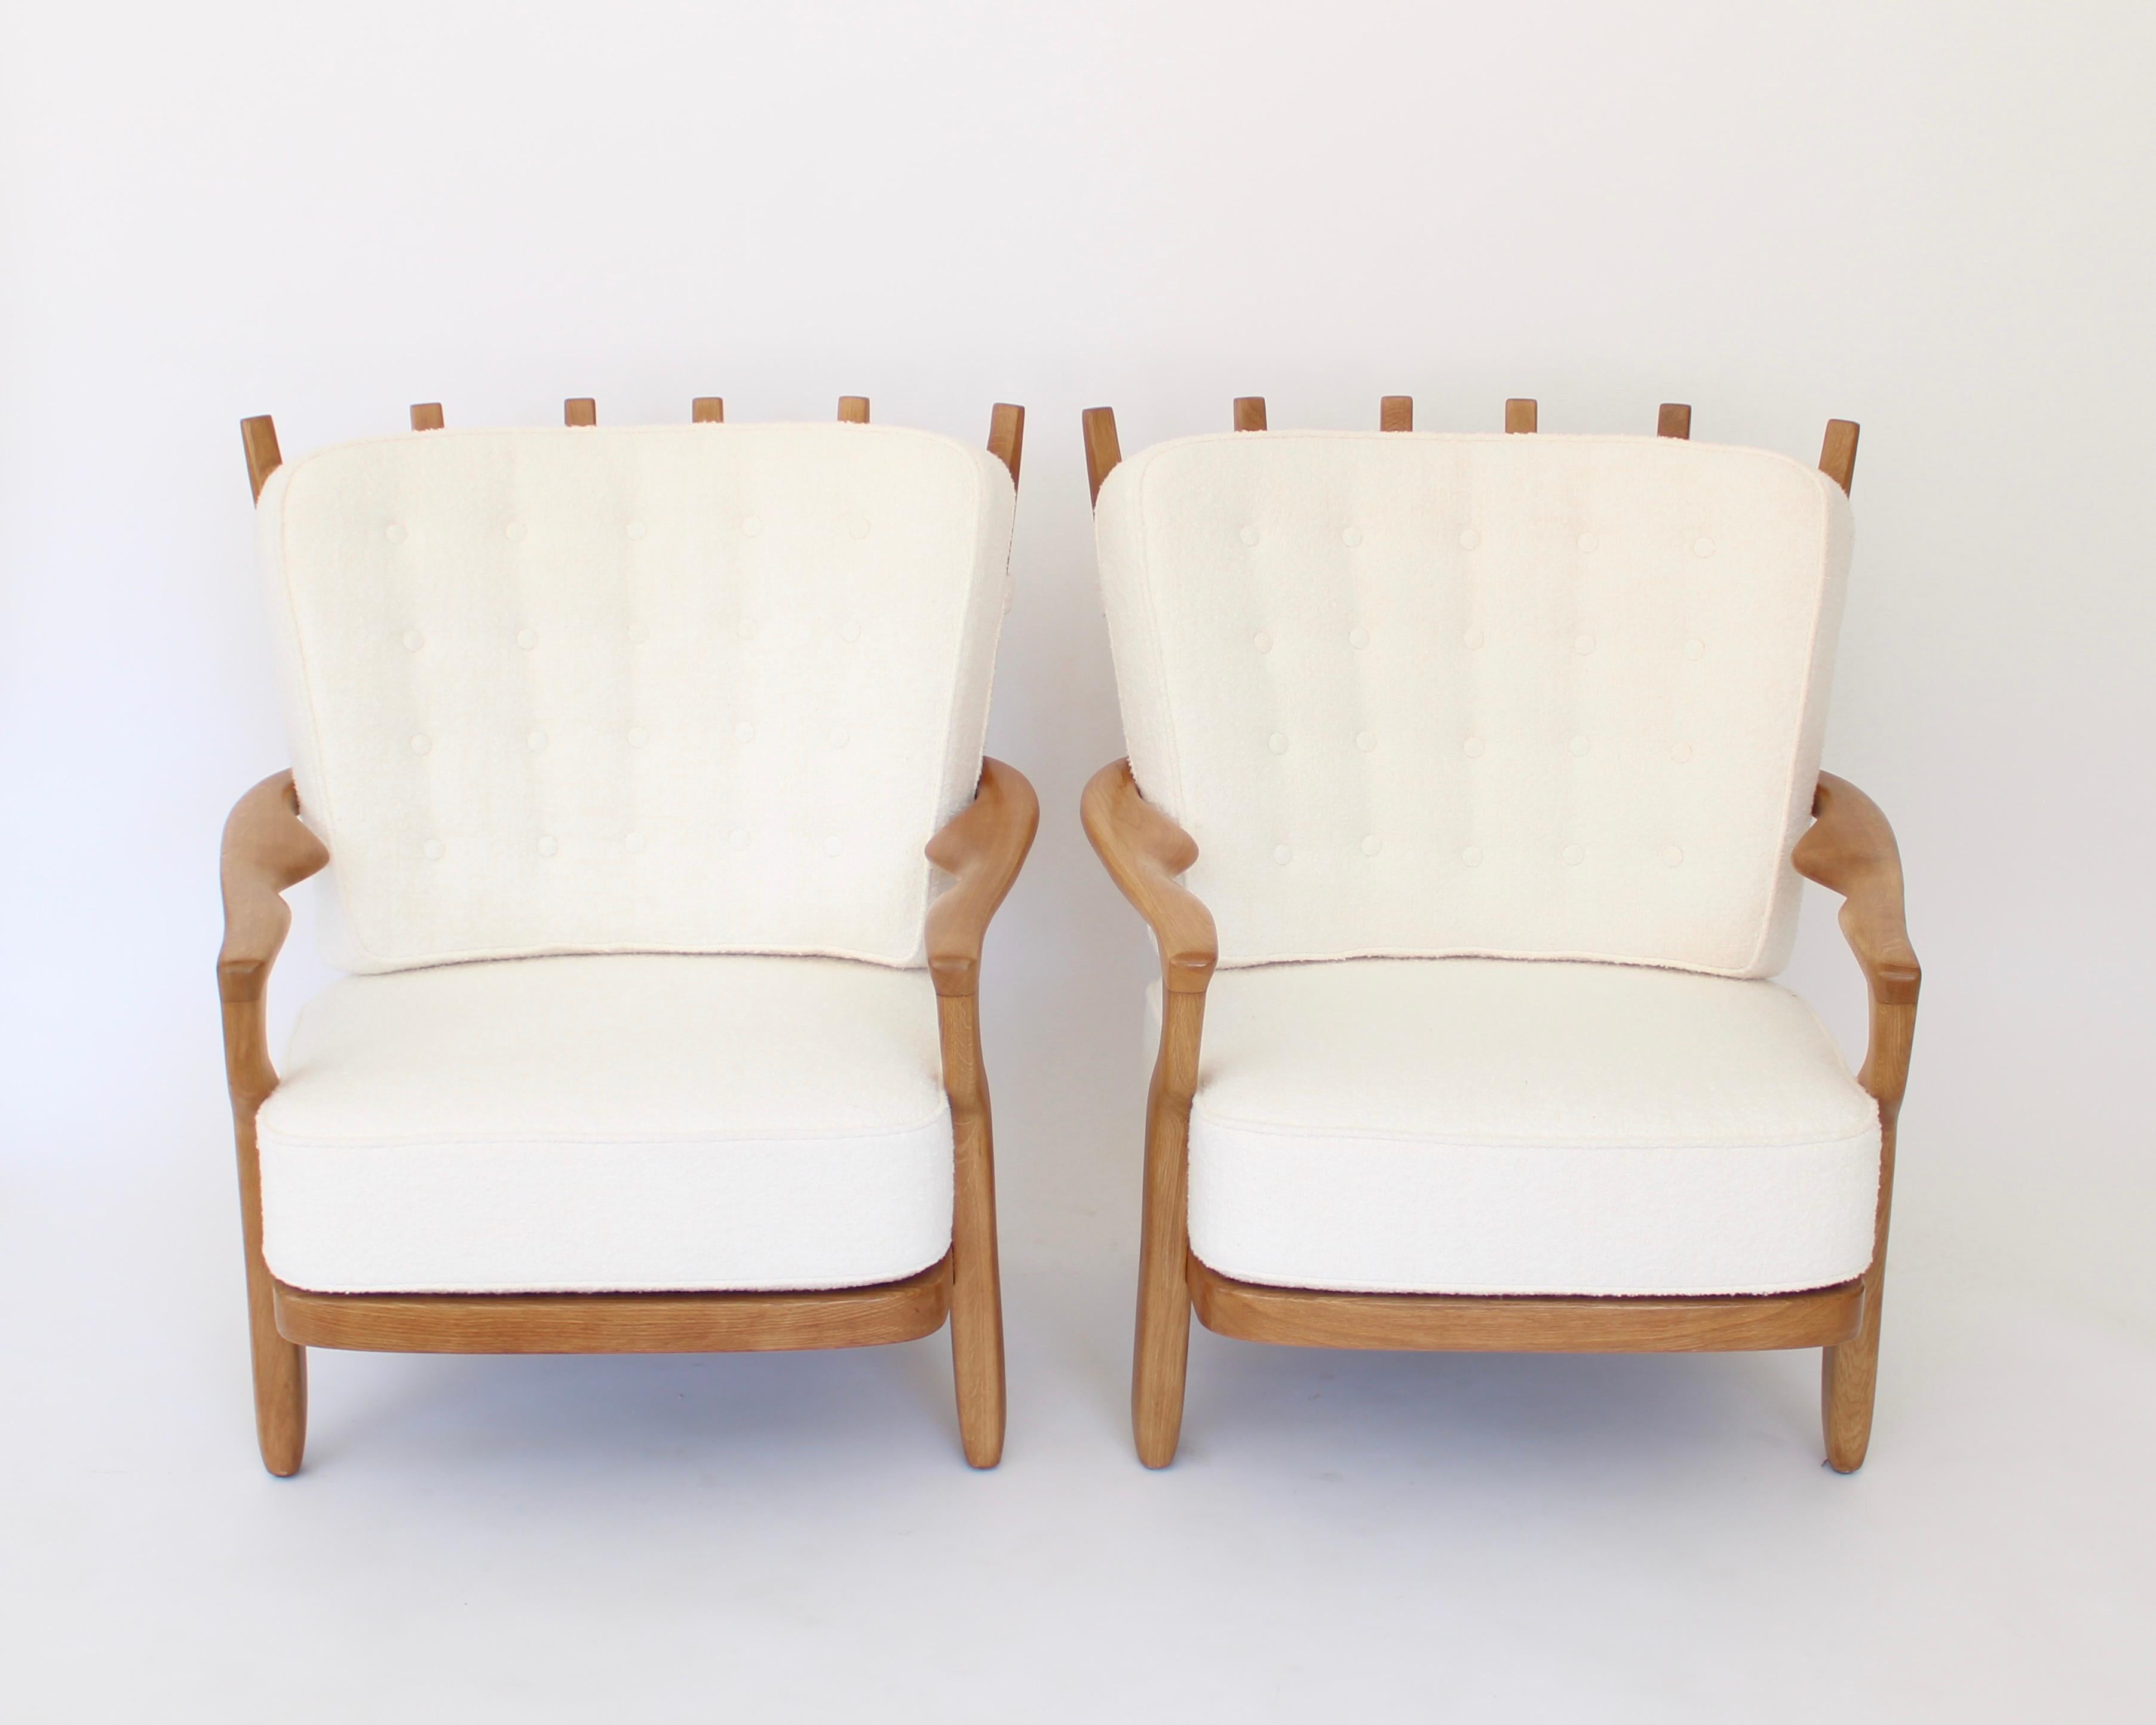 A pair of French oak lounge chairs model Juliette in sculptural carved oak, designed by the French designers Guillerme et Chambron for the French company 